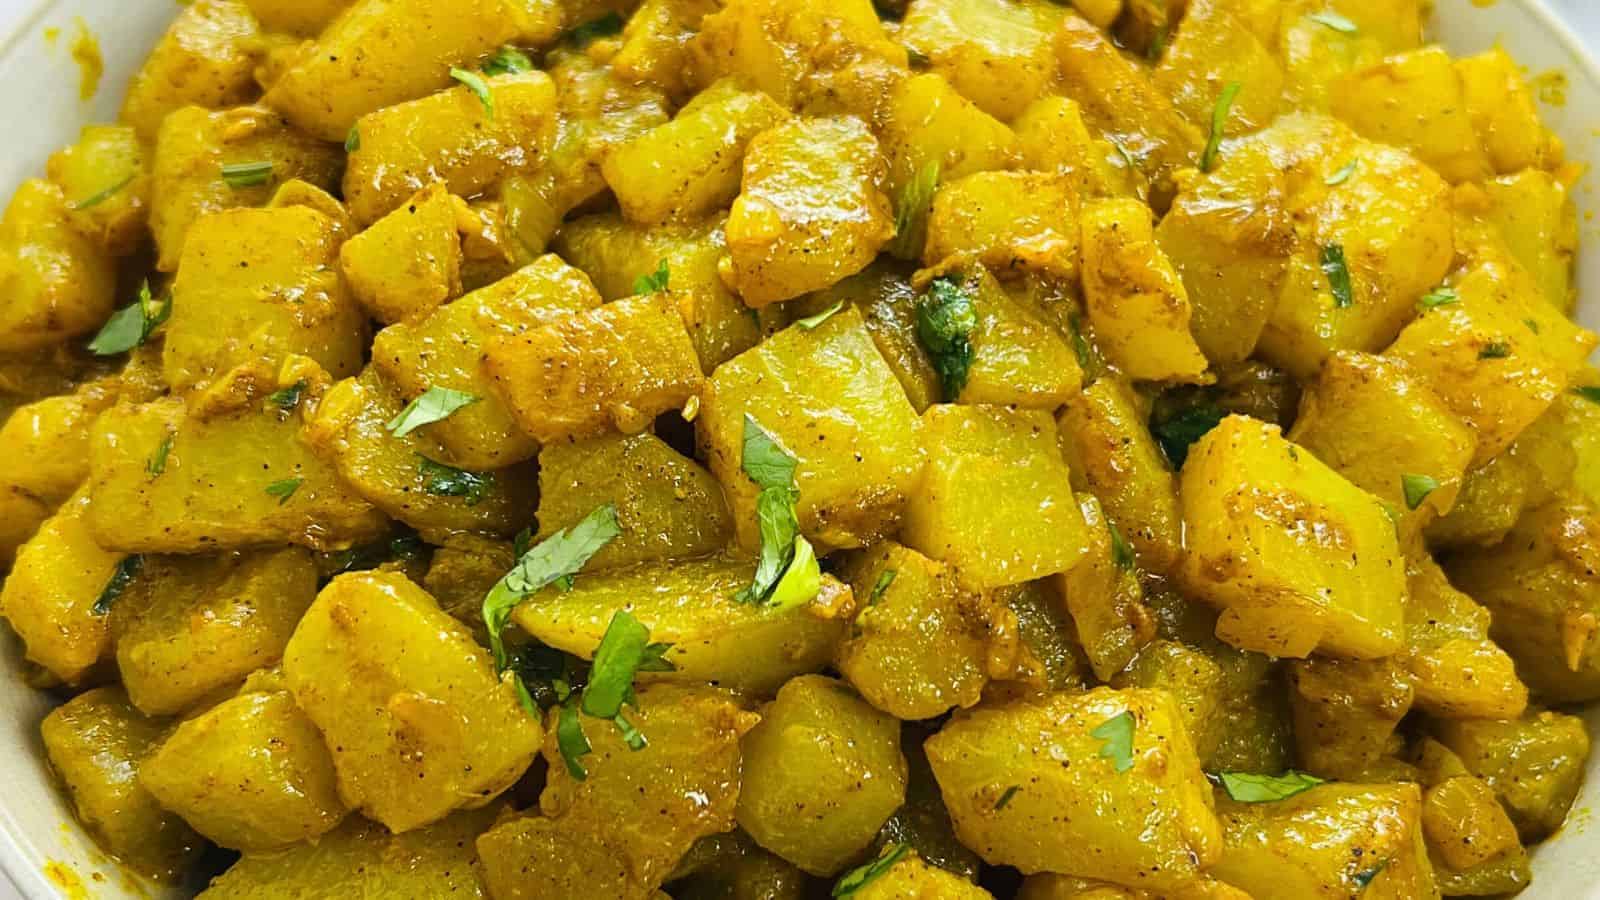 Close-up of a bowl filled with diced potatoes cooked with turmeric, garnished with chopped cilantro.